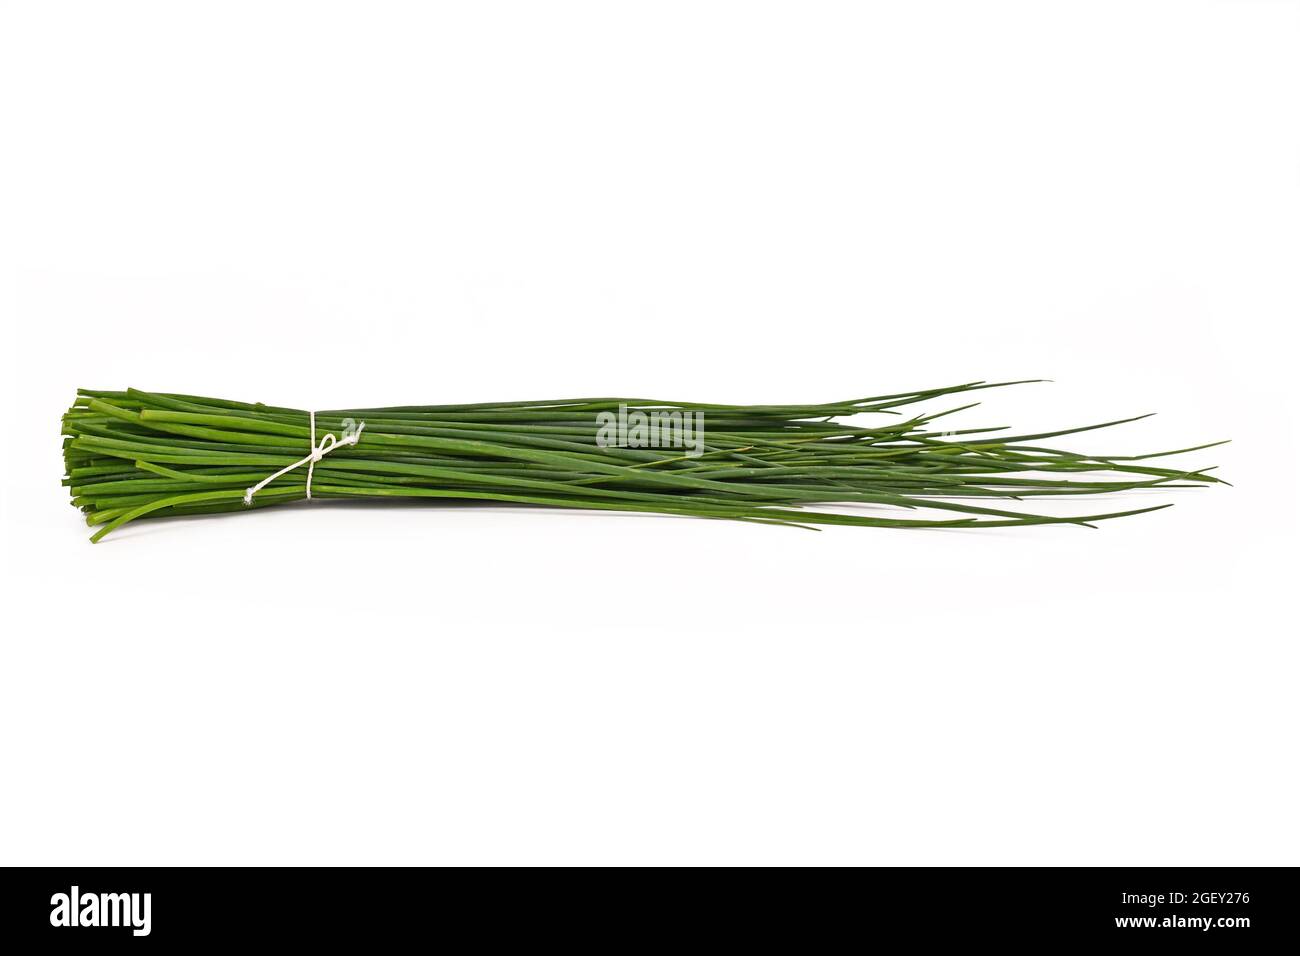 Bundle of cut chive tied with rope isolated on white background Stock Photo